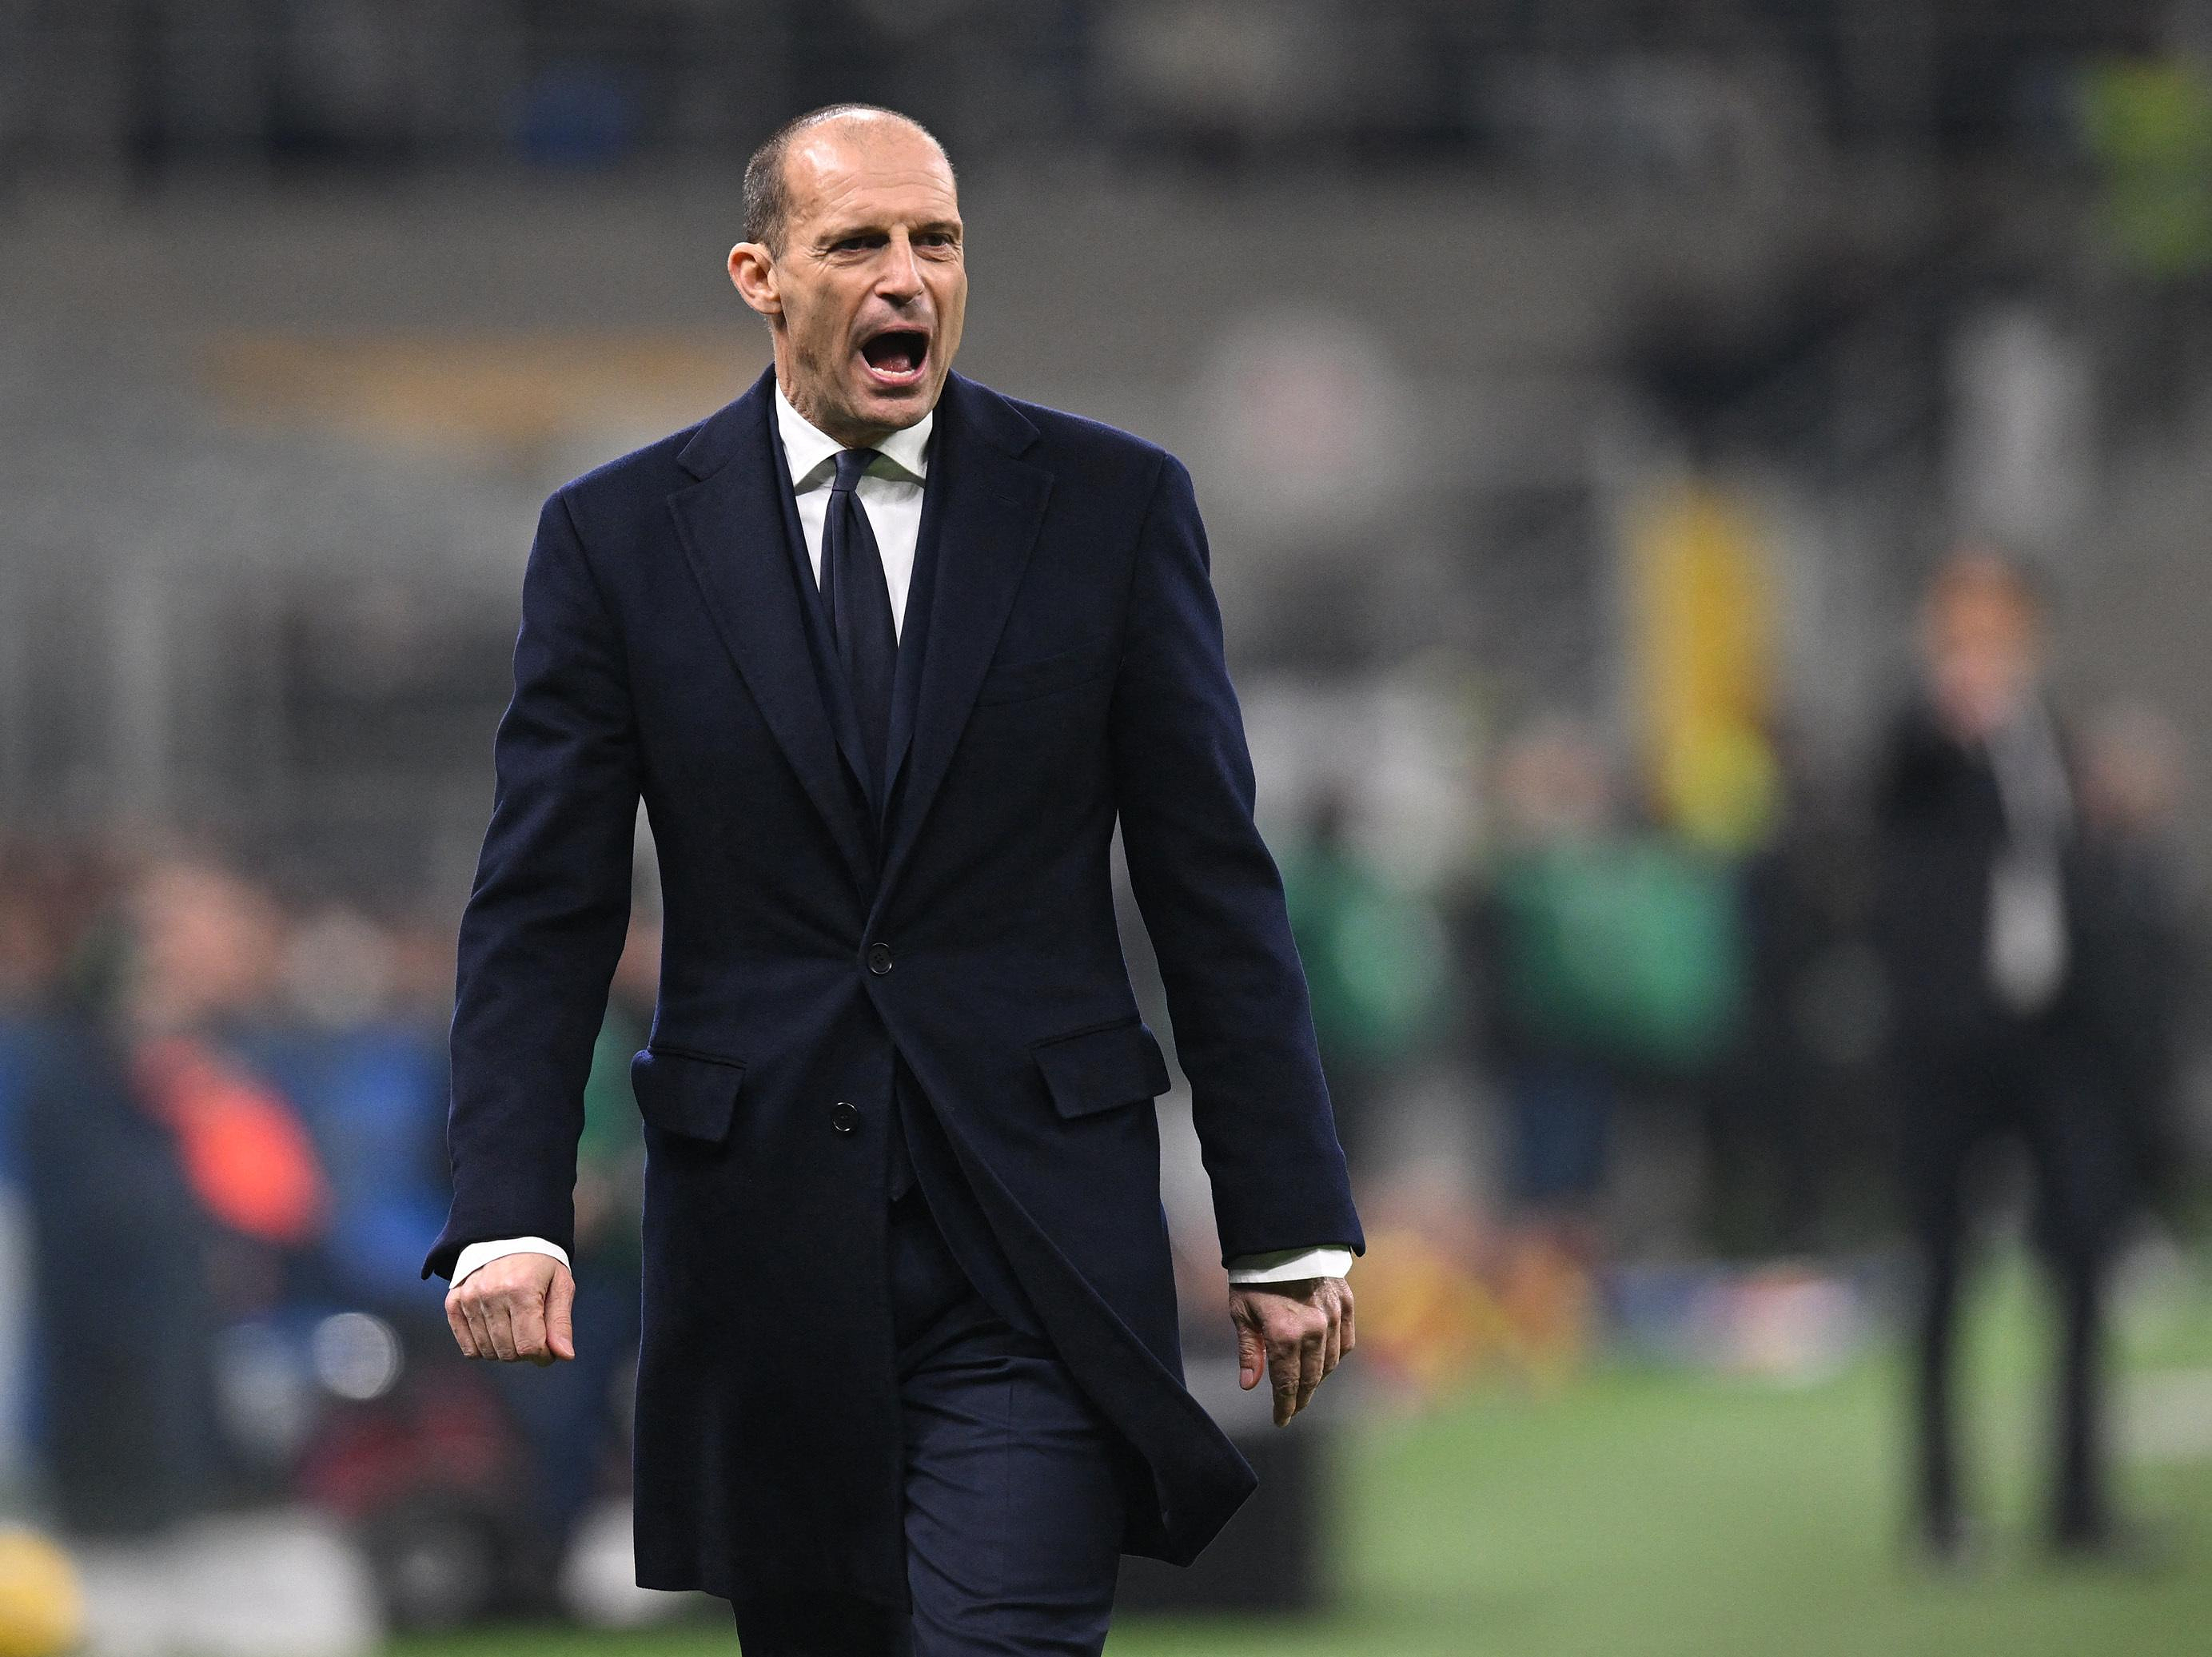 Serie A: despite defeat against Inter, Allegri has “nothing to reproach” for his Juventus team